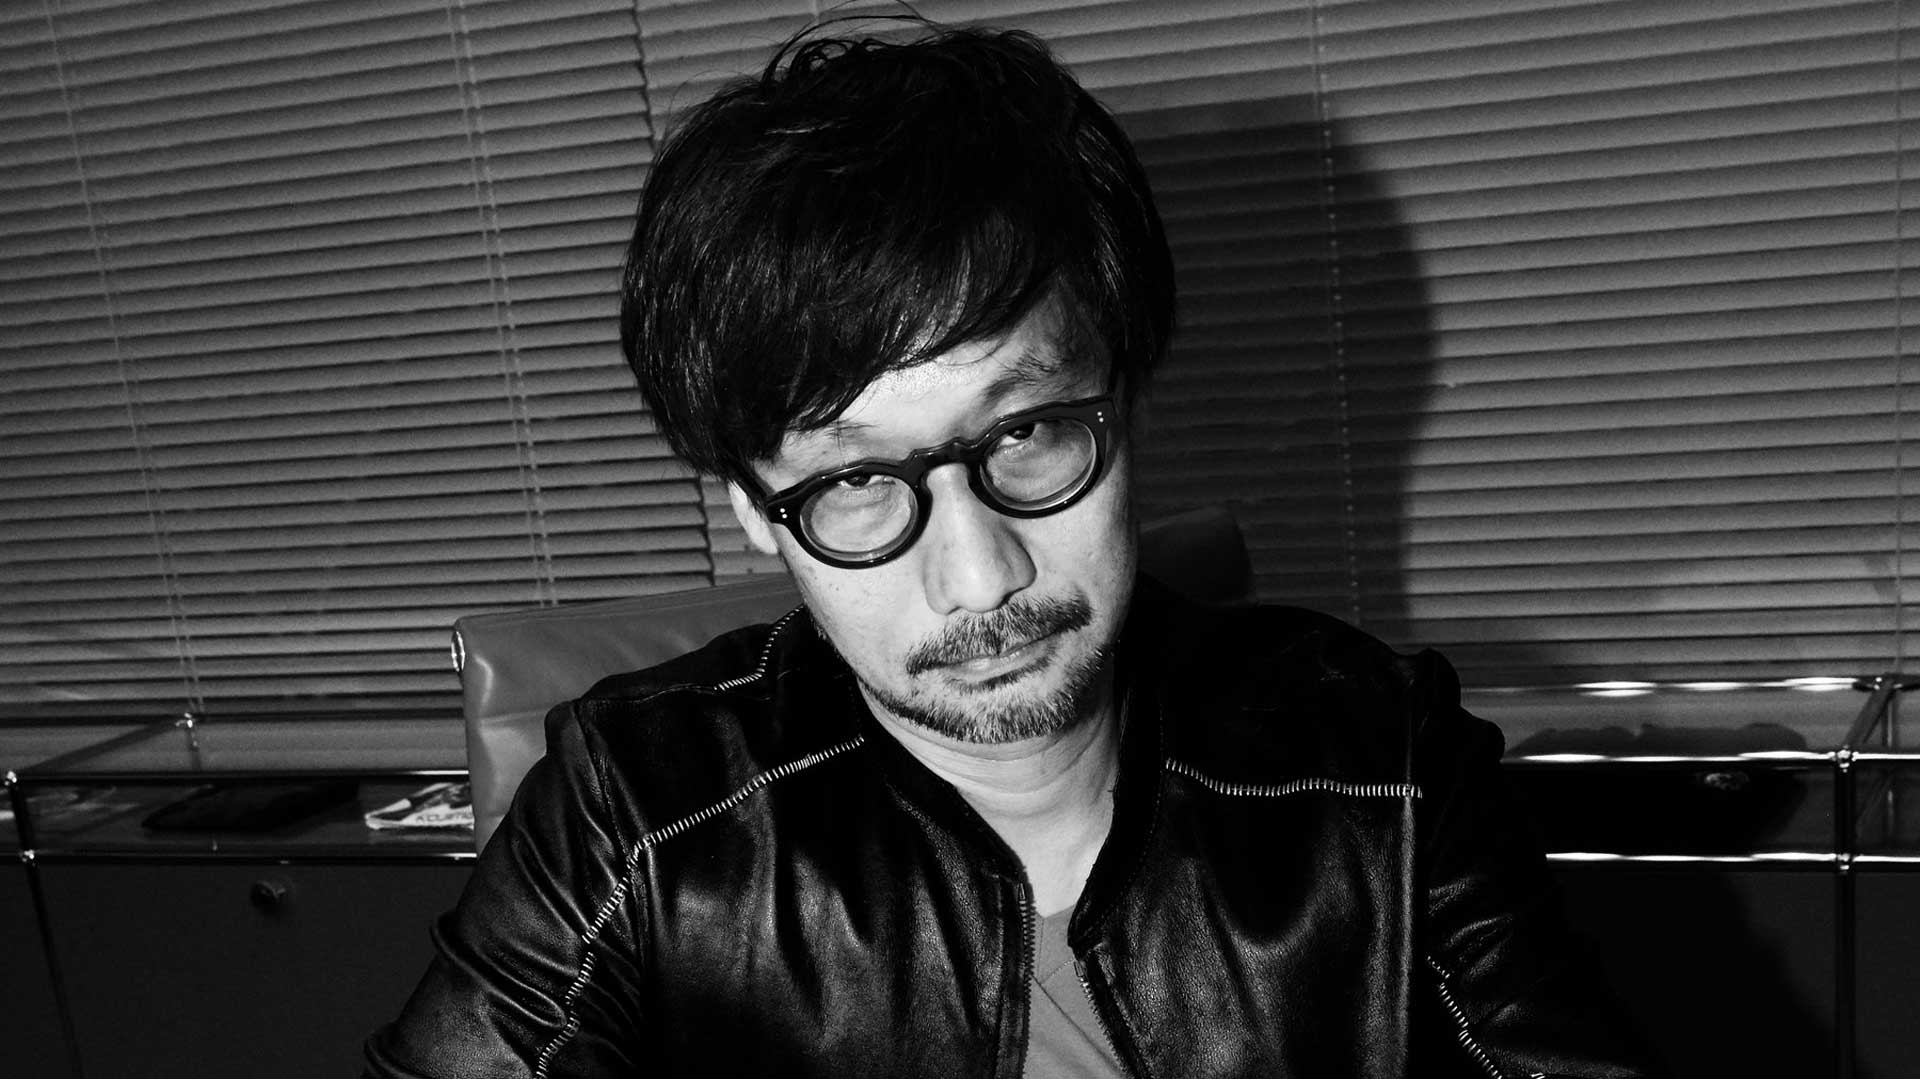 hideo kojima looking at the camera  Image of hideo kojima looking at the camera